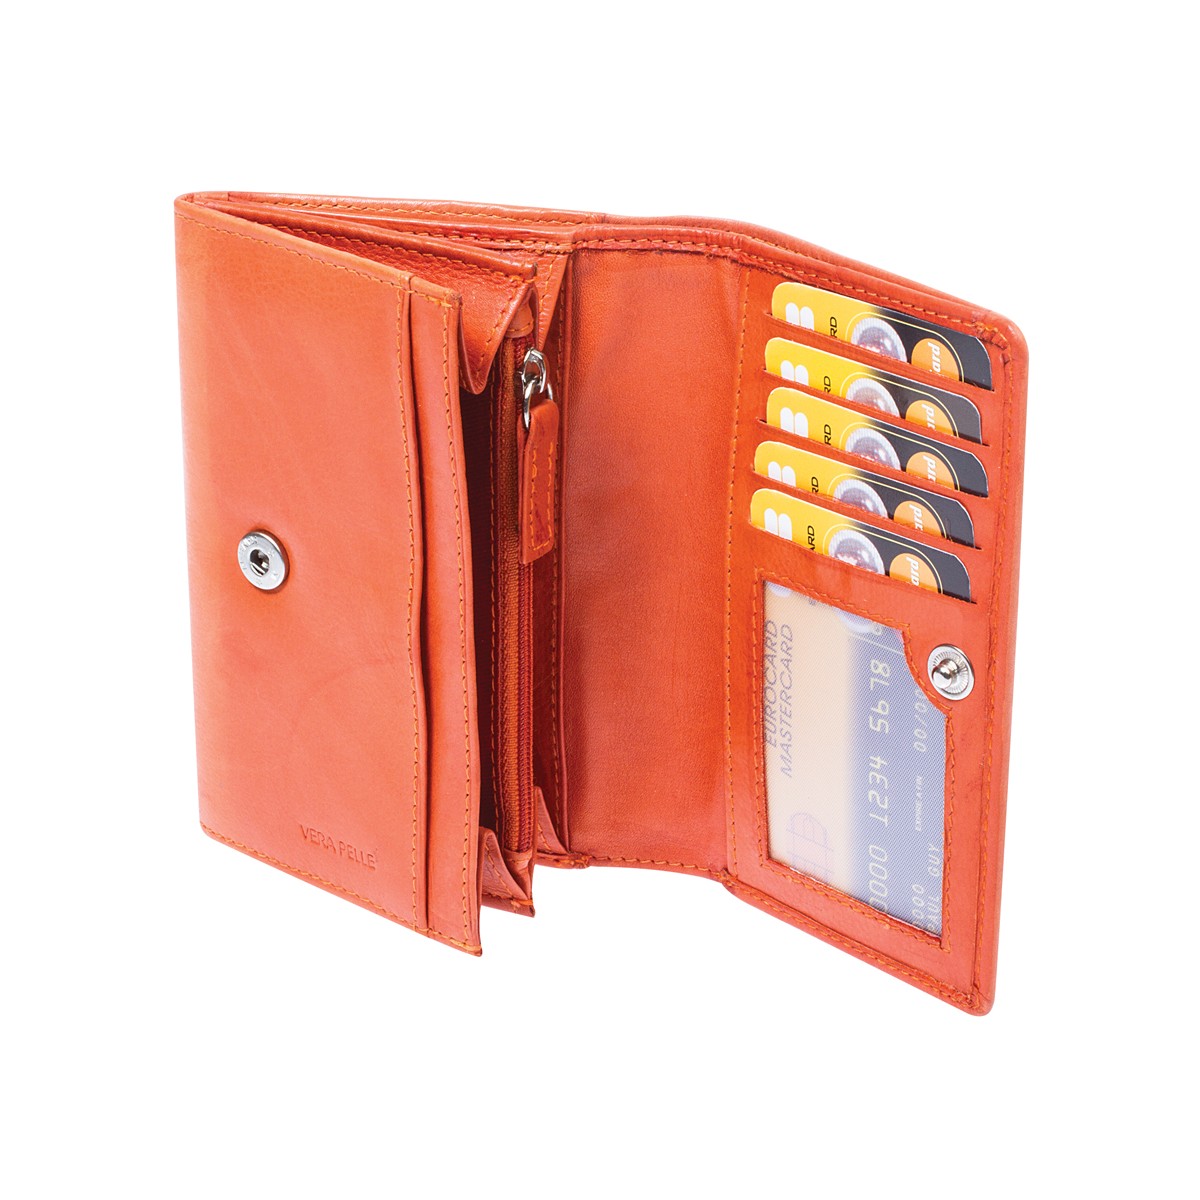 Women's wallet sauvage orange calfskin for cards banknotes coins